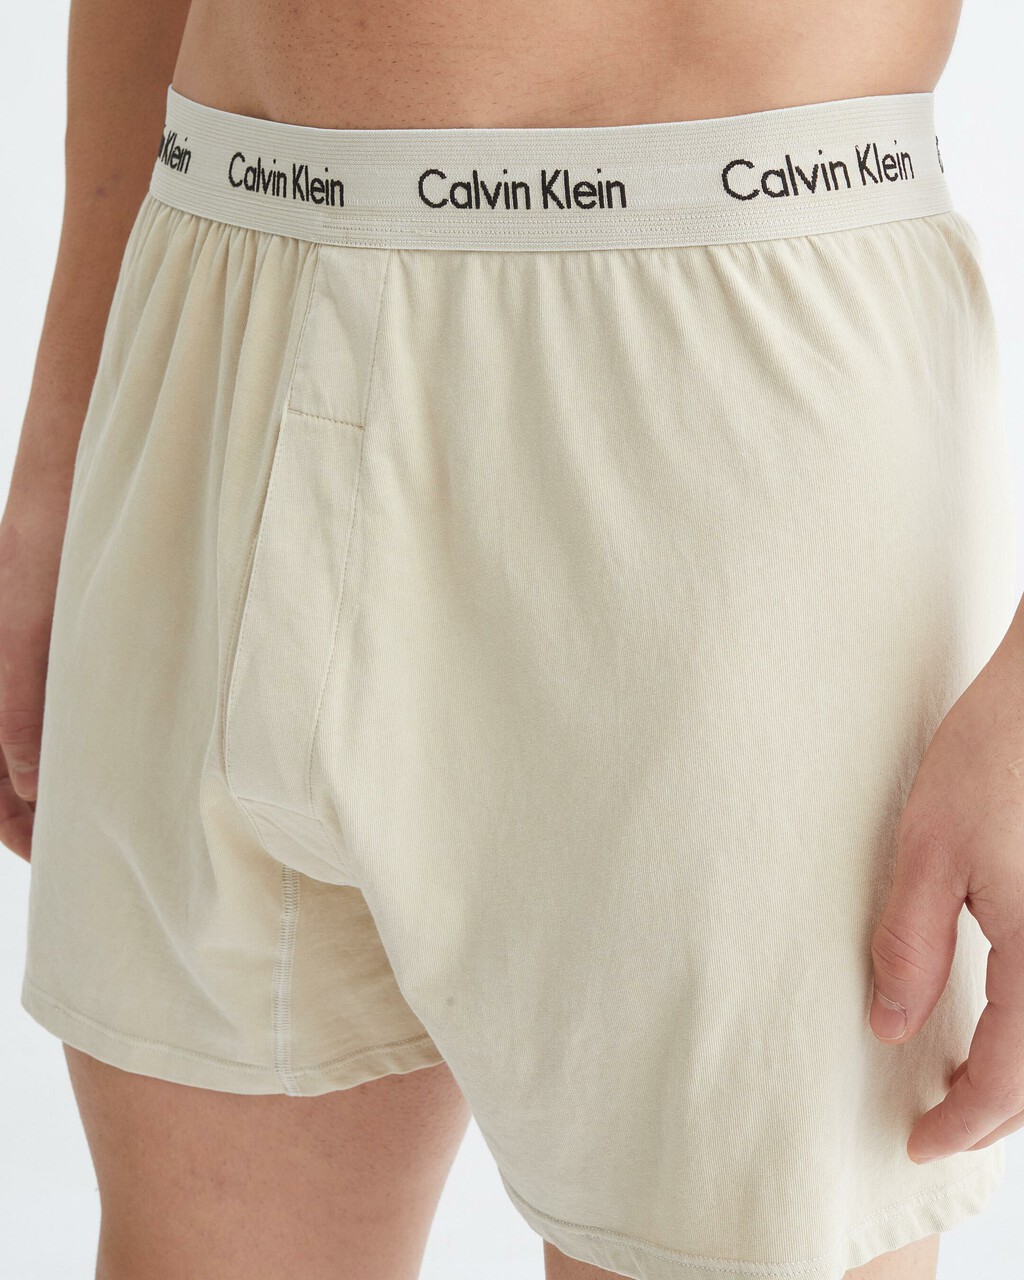 MODERN COTTON BOXERS, SHELL, hi-res